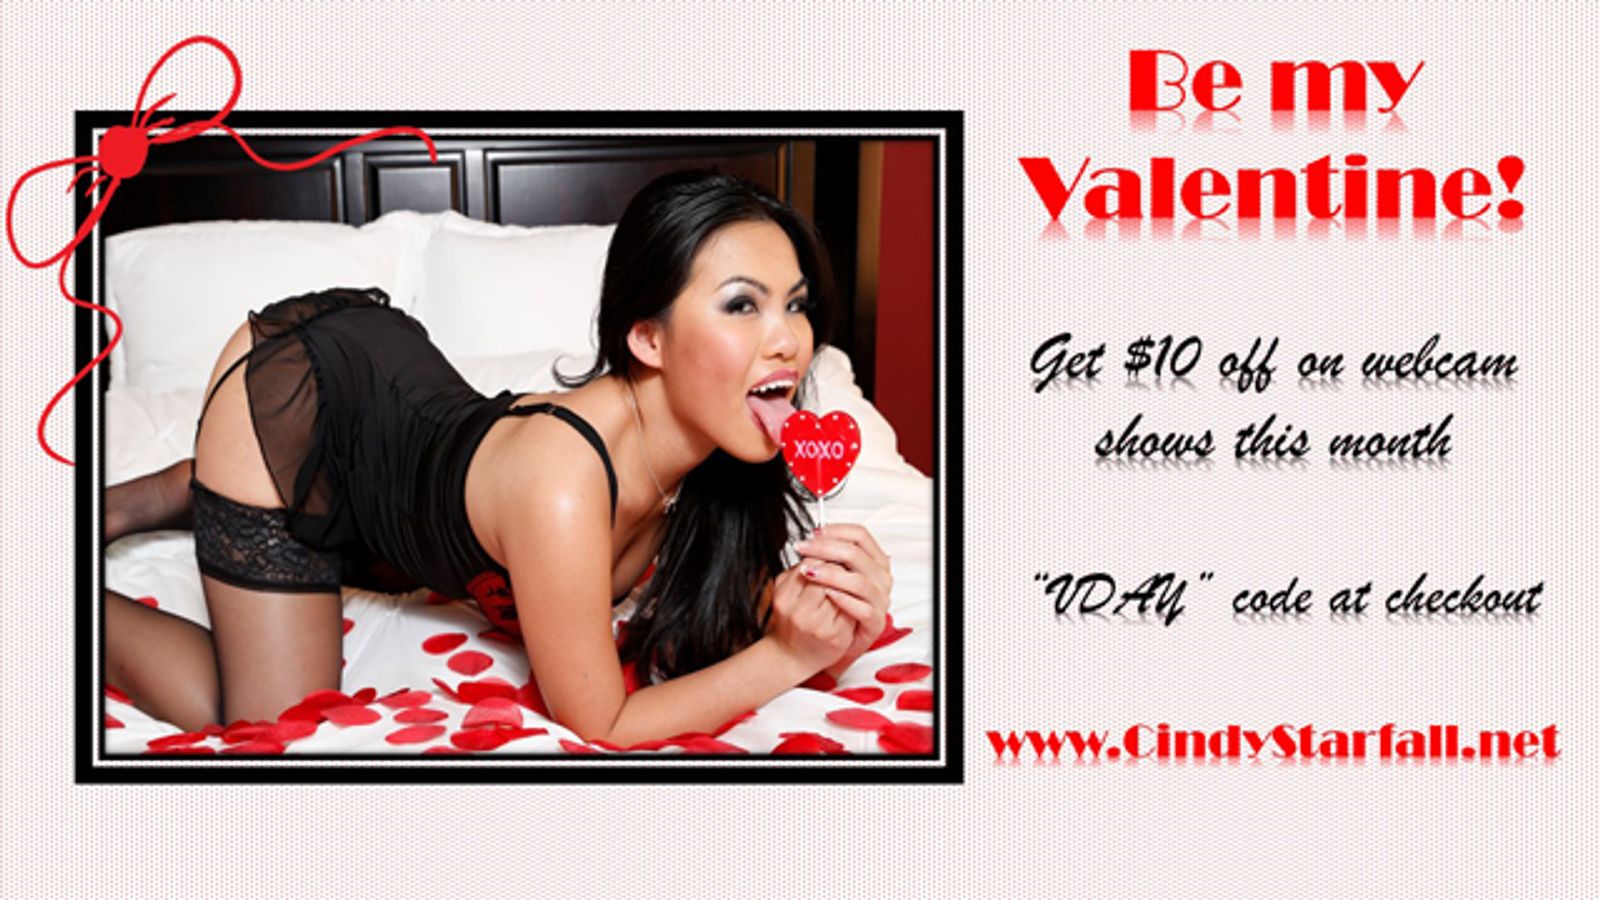 Cindy Starfall Launches Webcam Special on Valentine’s Day